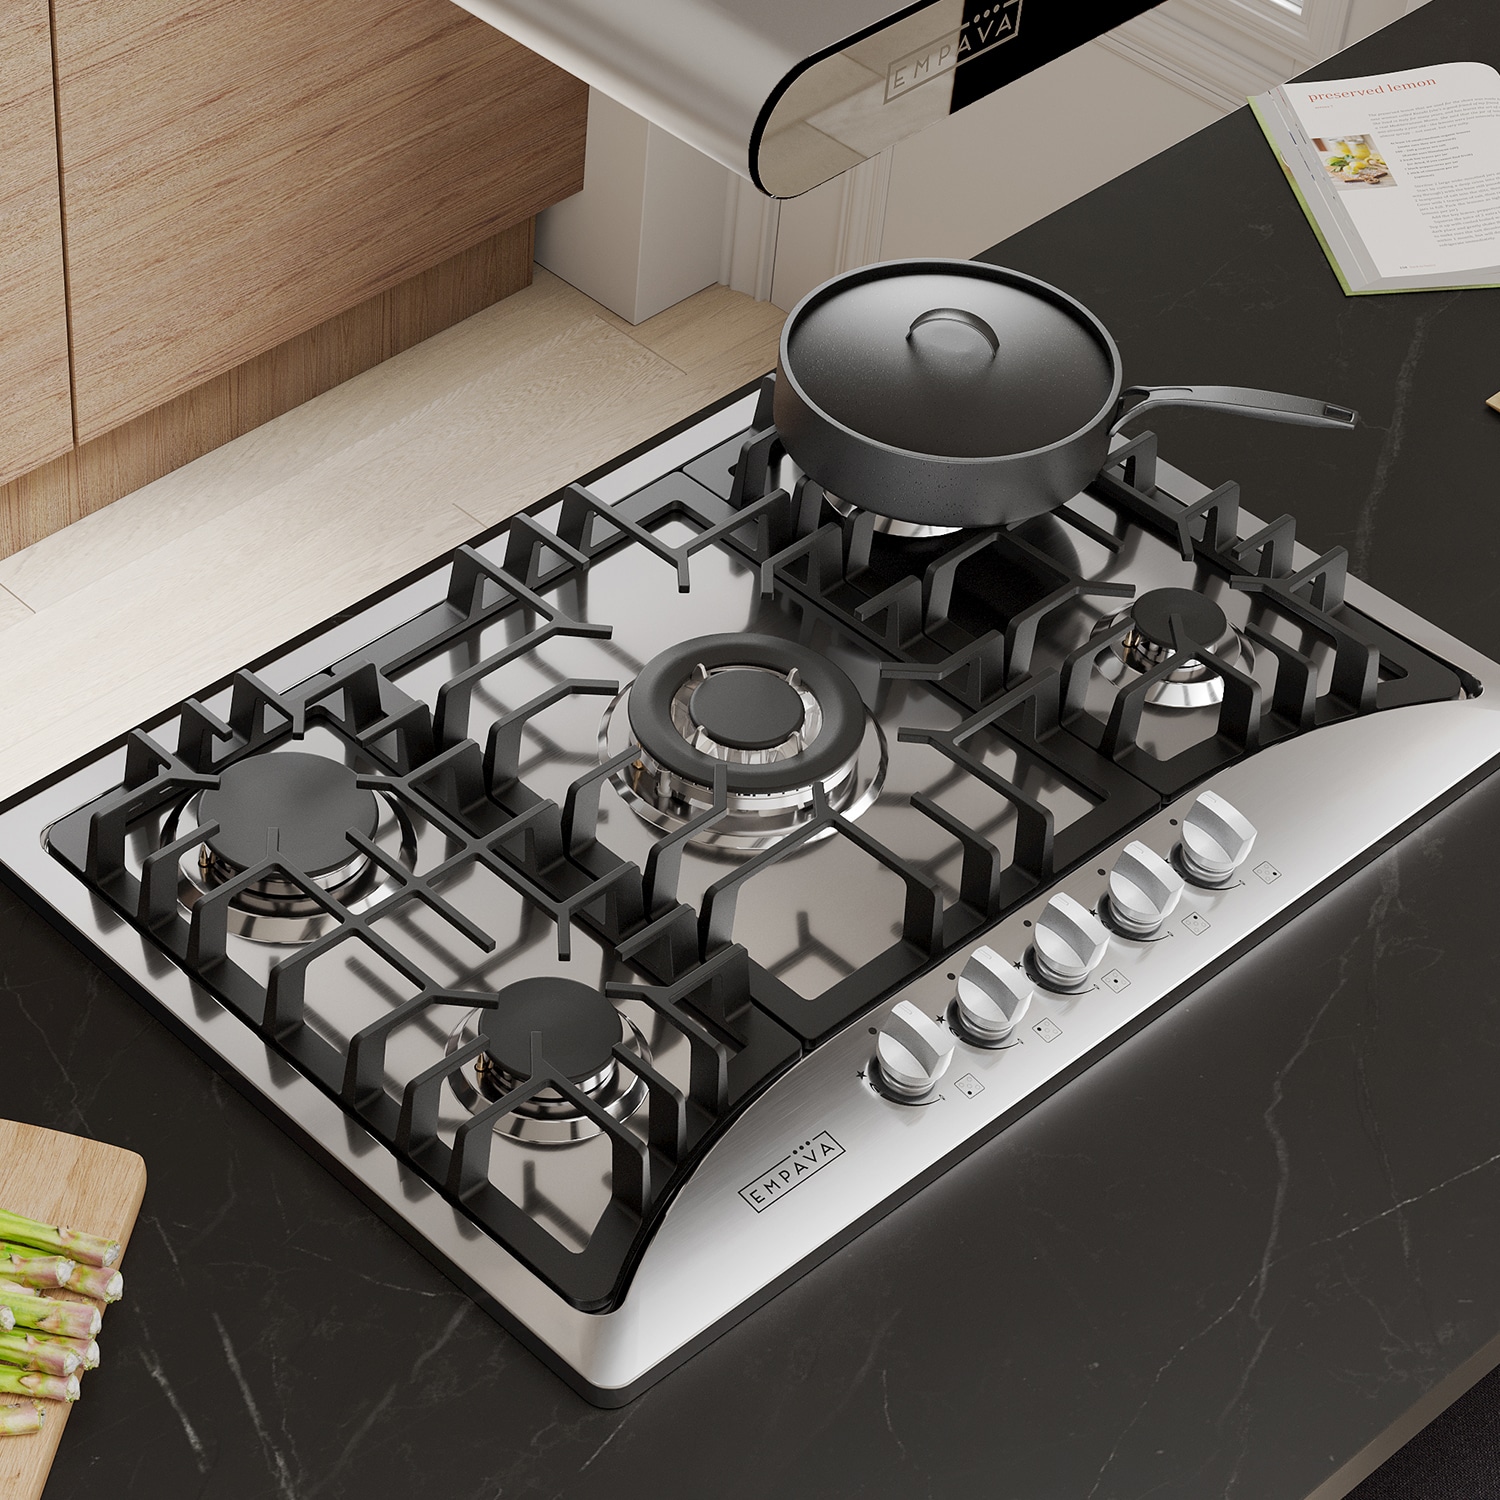 Bosch cooktop - gas hob for small kitchens  Outdoor kitchen appliances,  Outdoor kitchen, Outdoor kitchen design